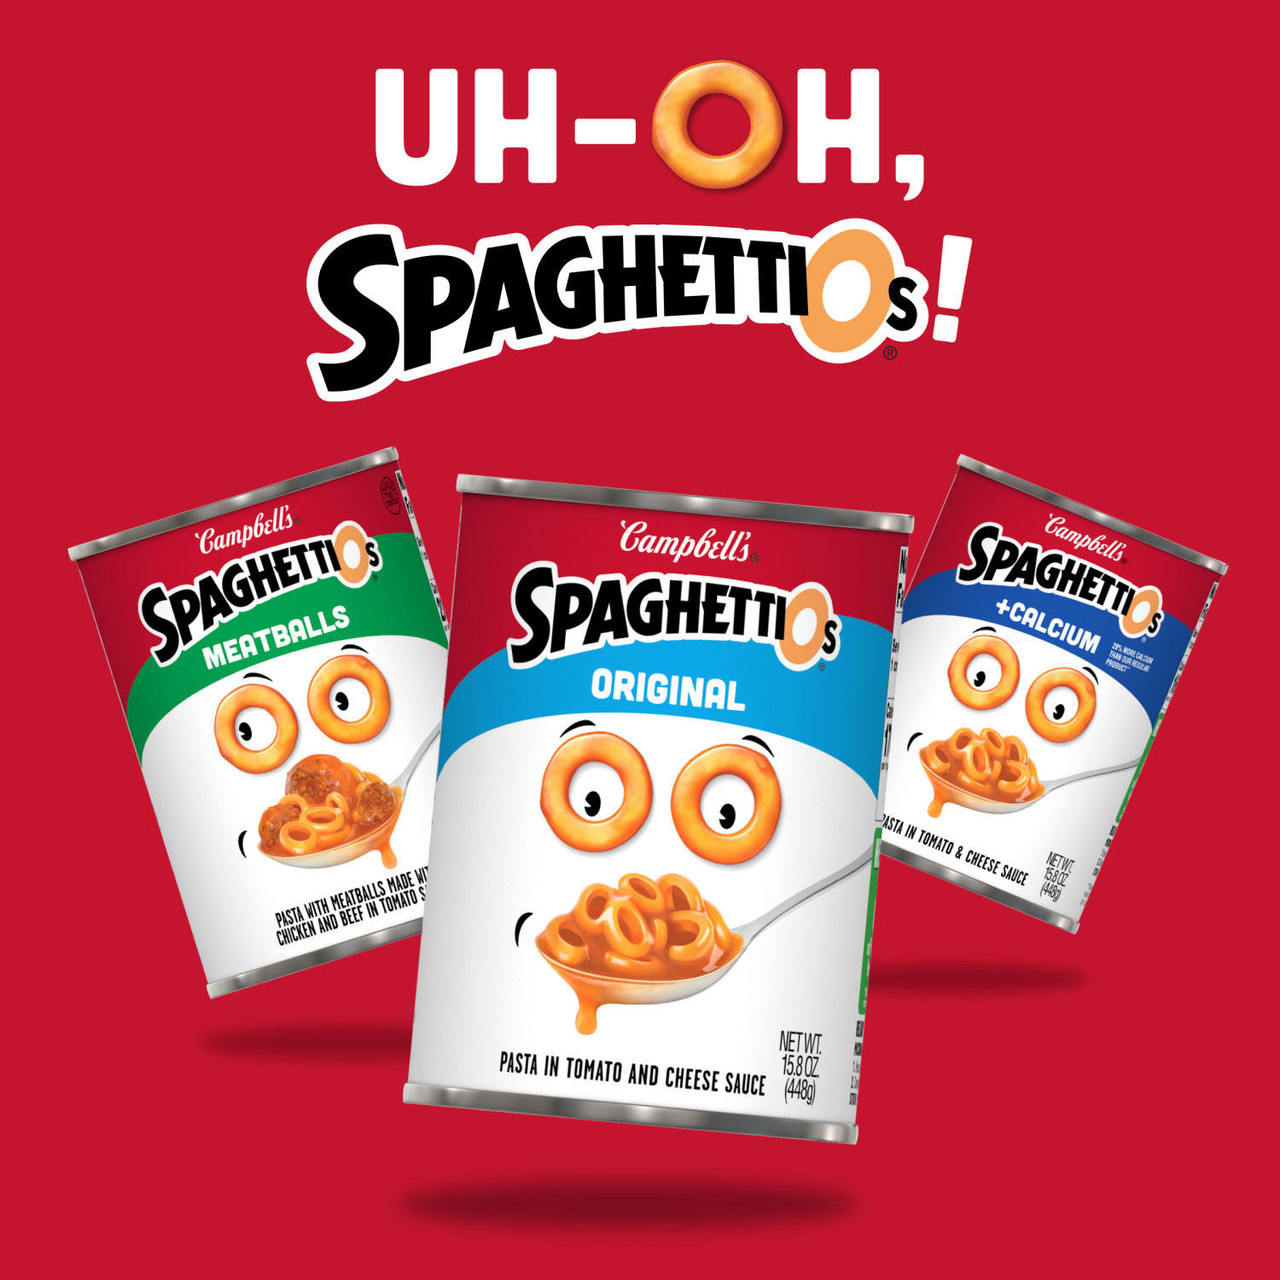 Campbell's SpaghettiOs Canned Pasta with Meatballs (15.6 oz., 12 pk.) - [From 58.00 - Choose pk Qty ] - *Ships from Miami